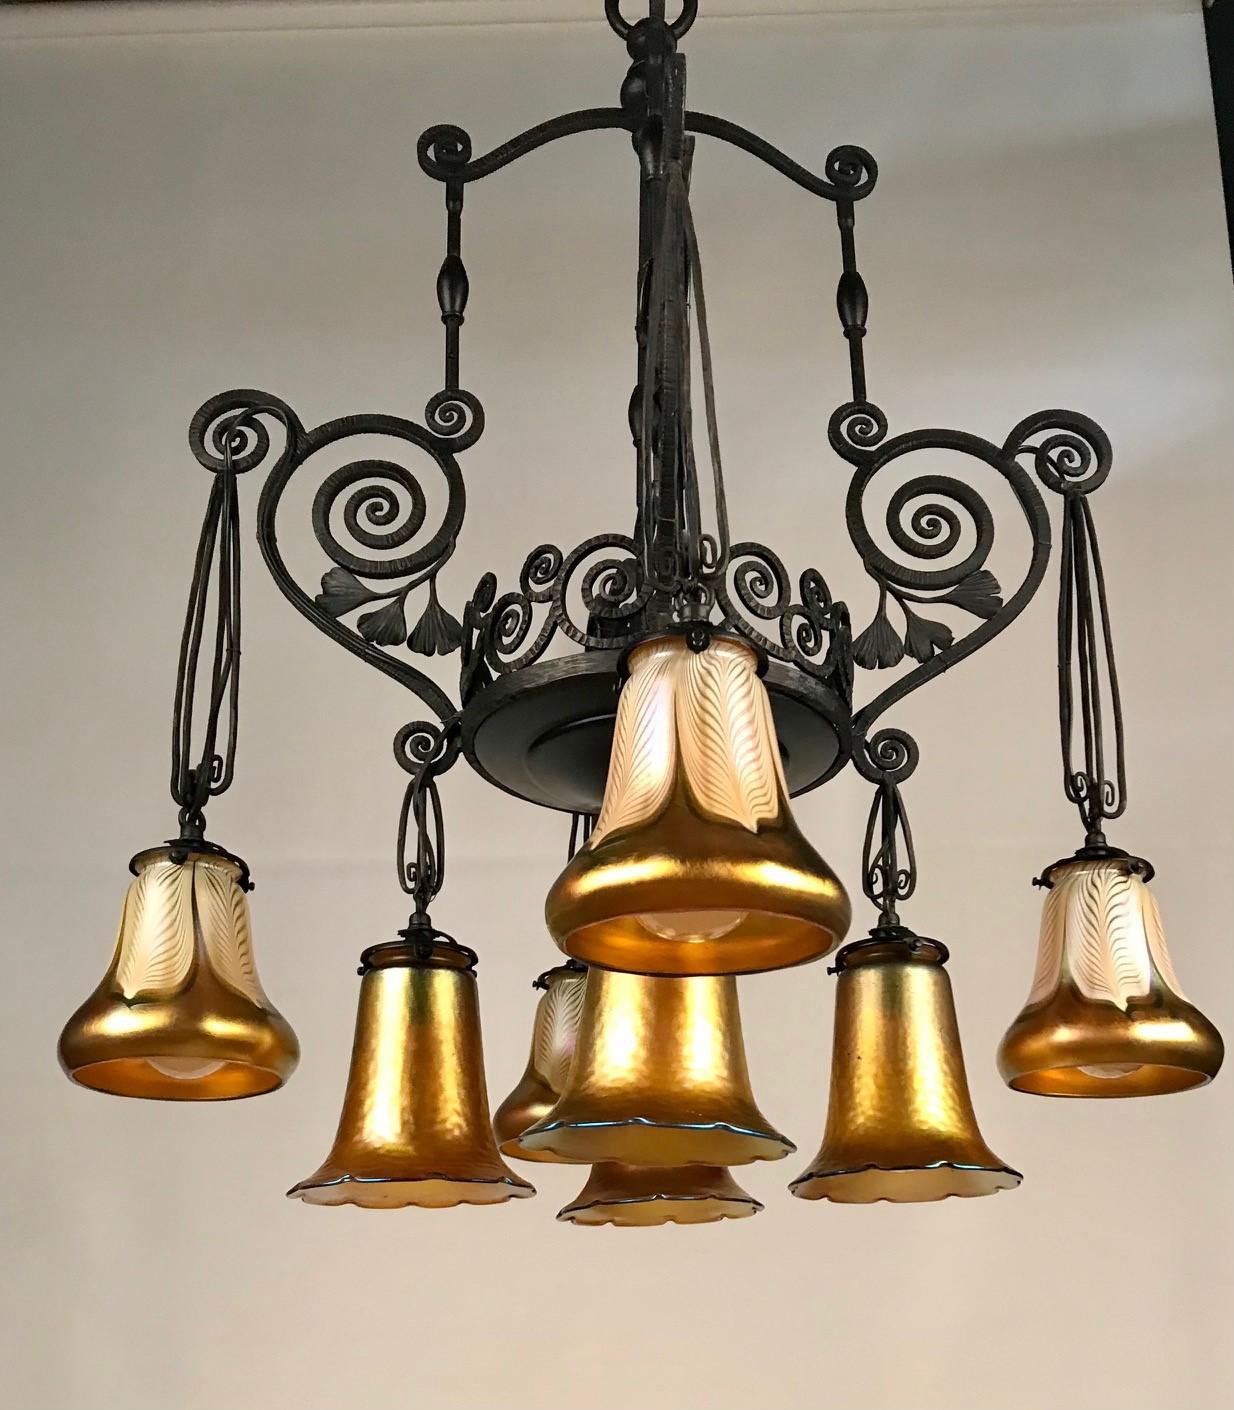 Early 20th Century French Art Deco Iron Eight-Light Chandelier with Quezal Shades